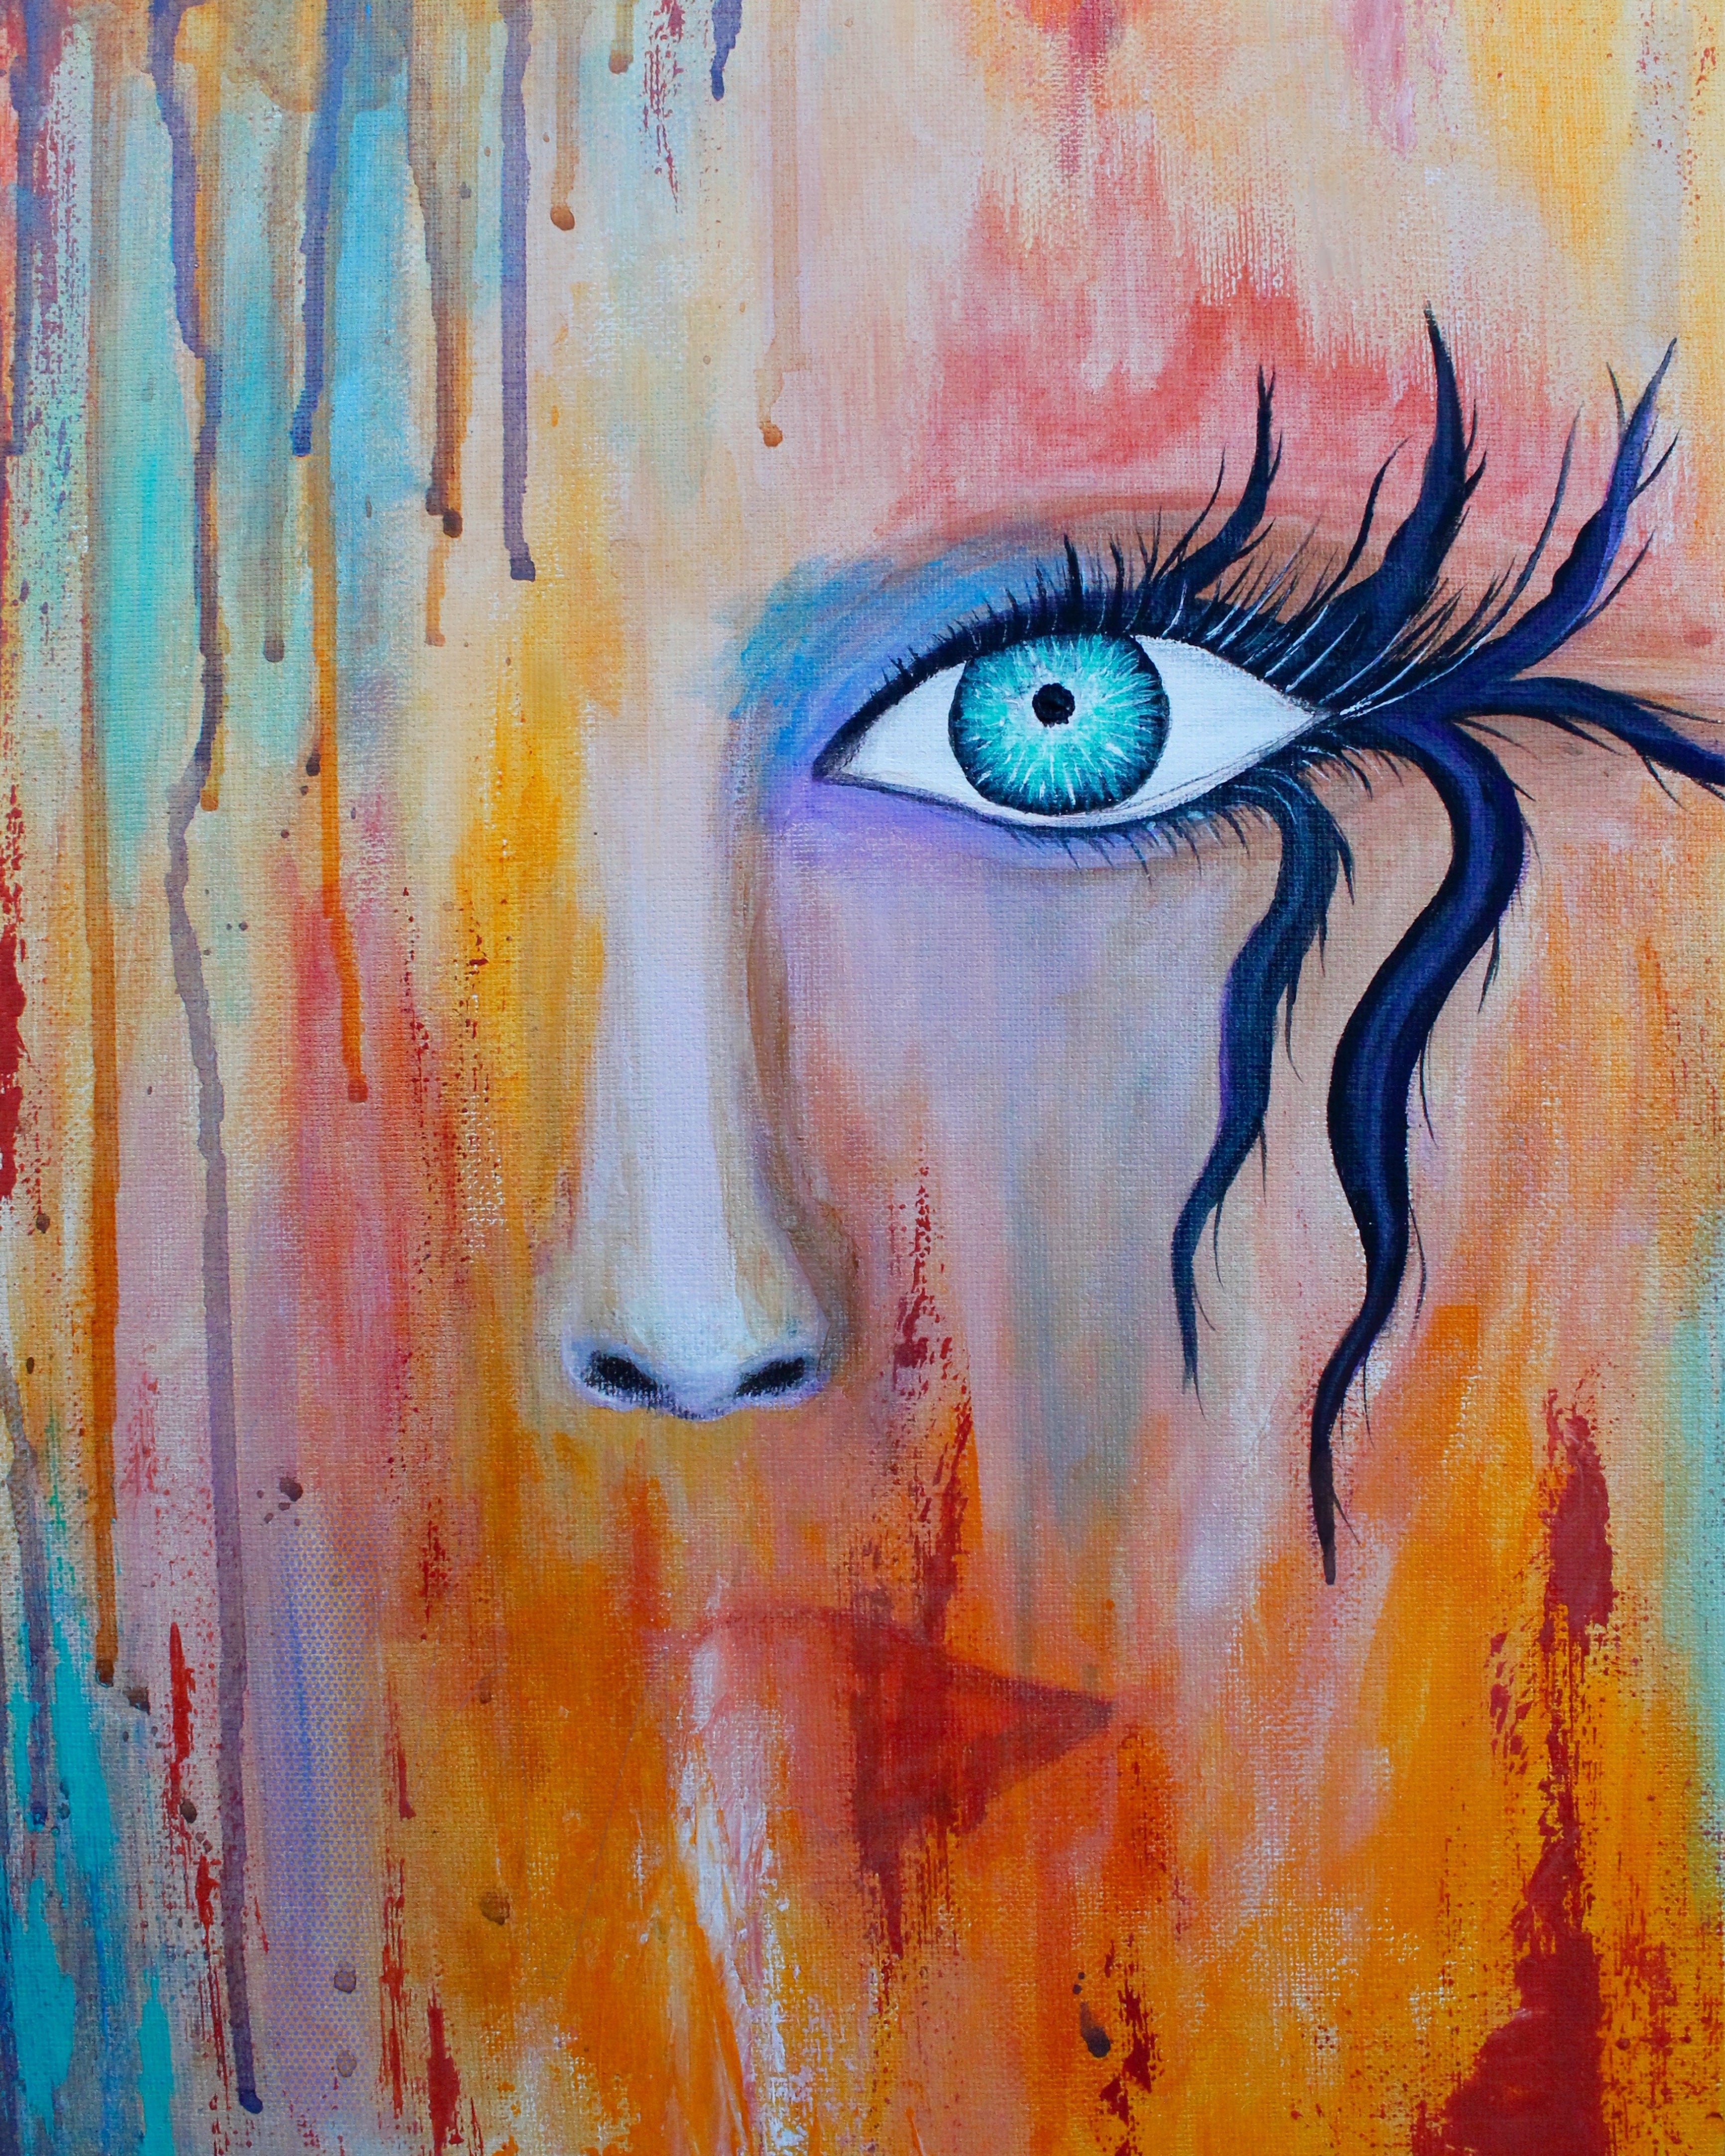 out of my comfort zone 11x14 print - acrylic painting of an eye and abstract painting of a face